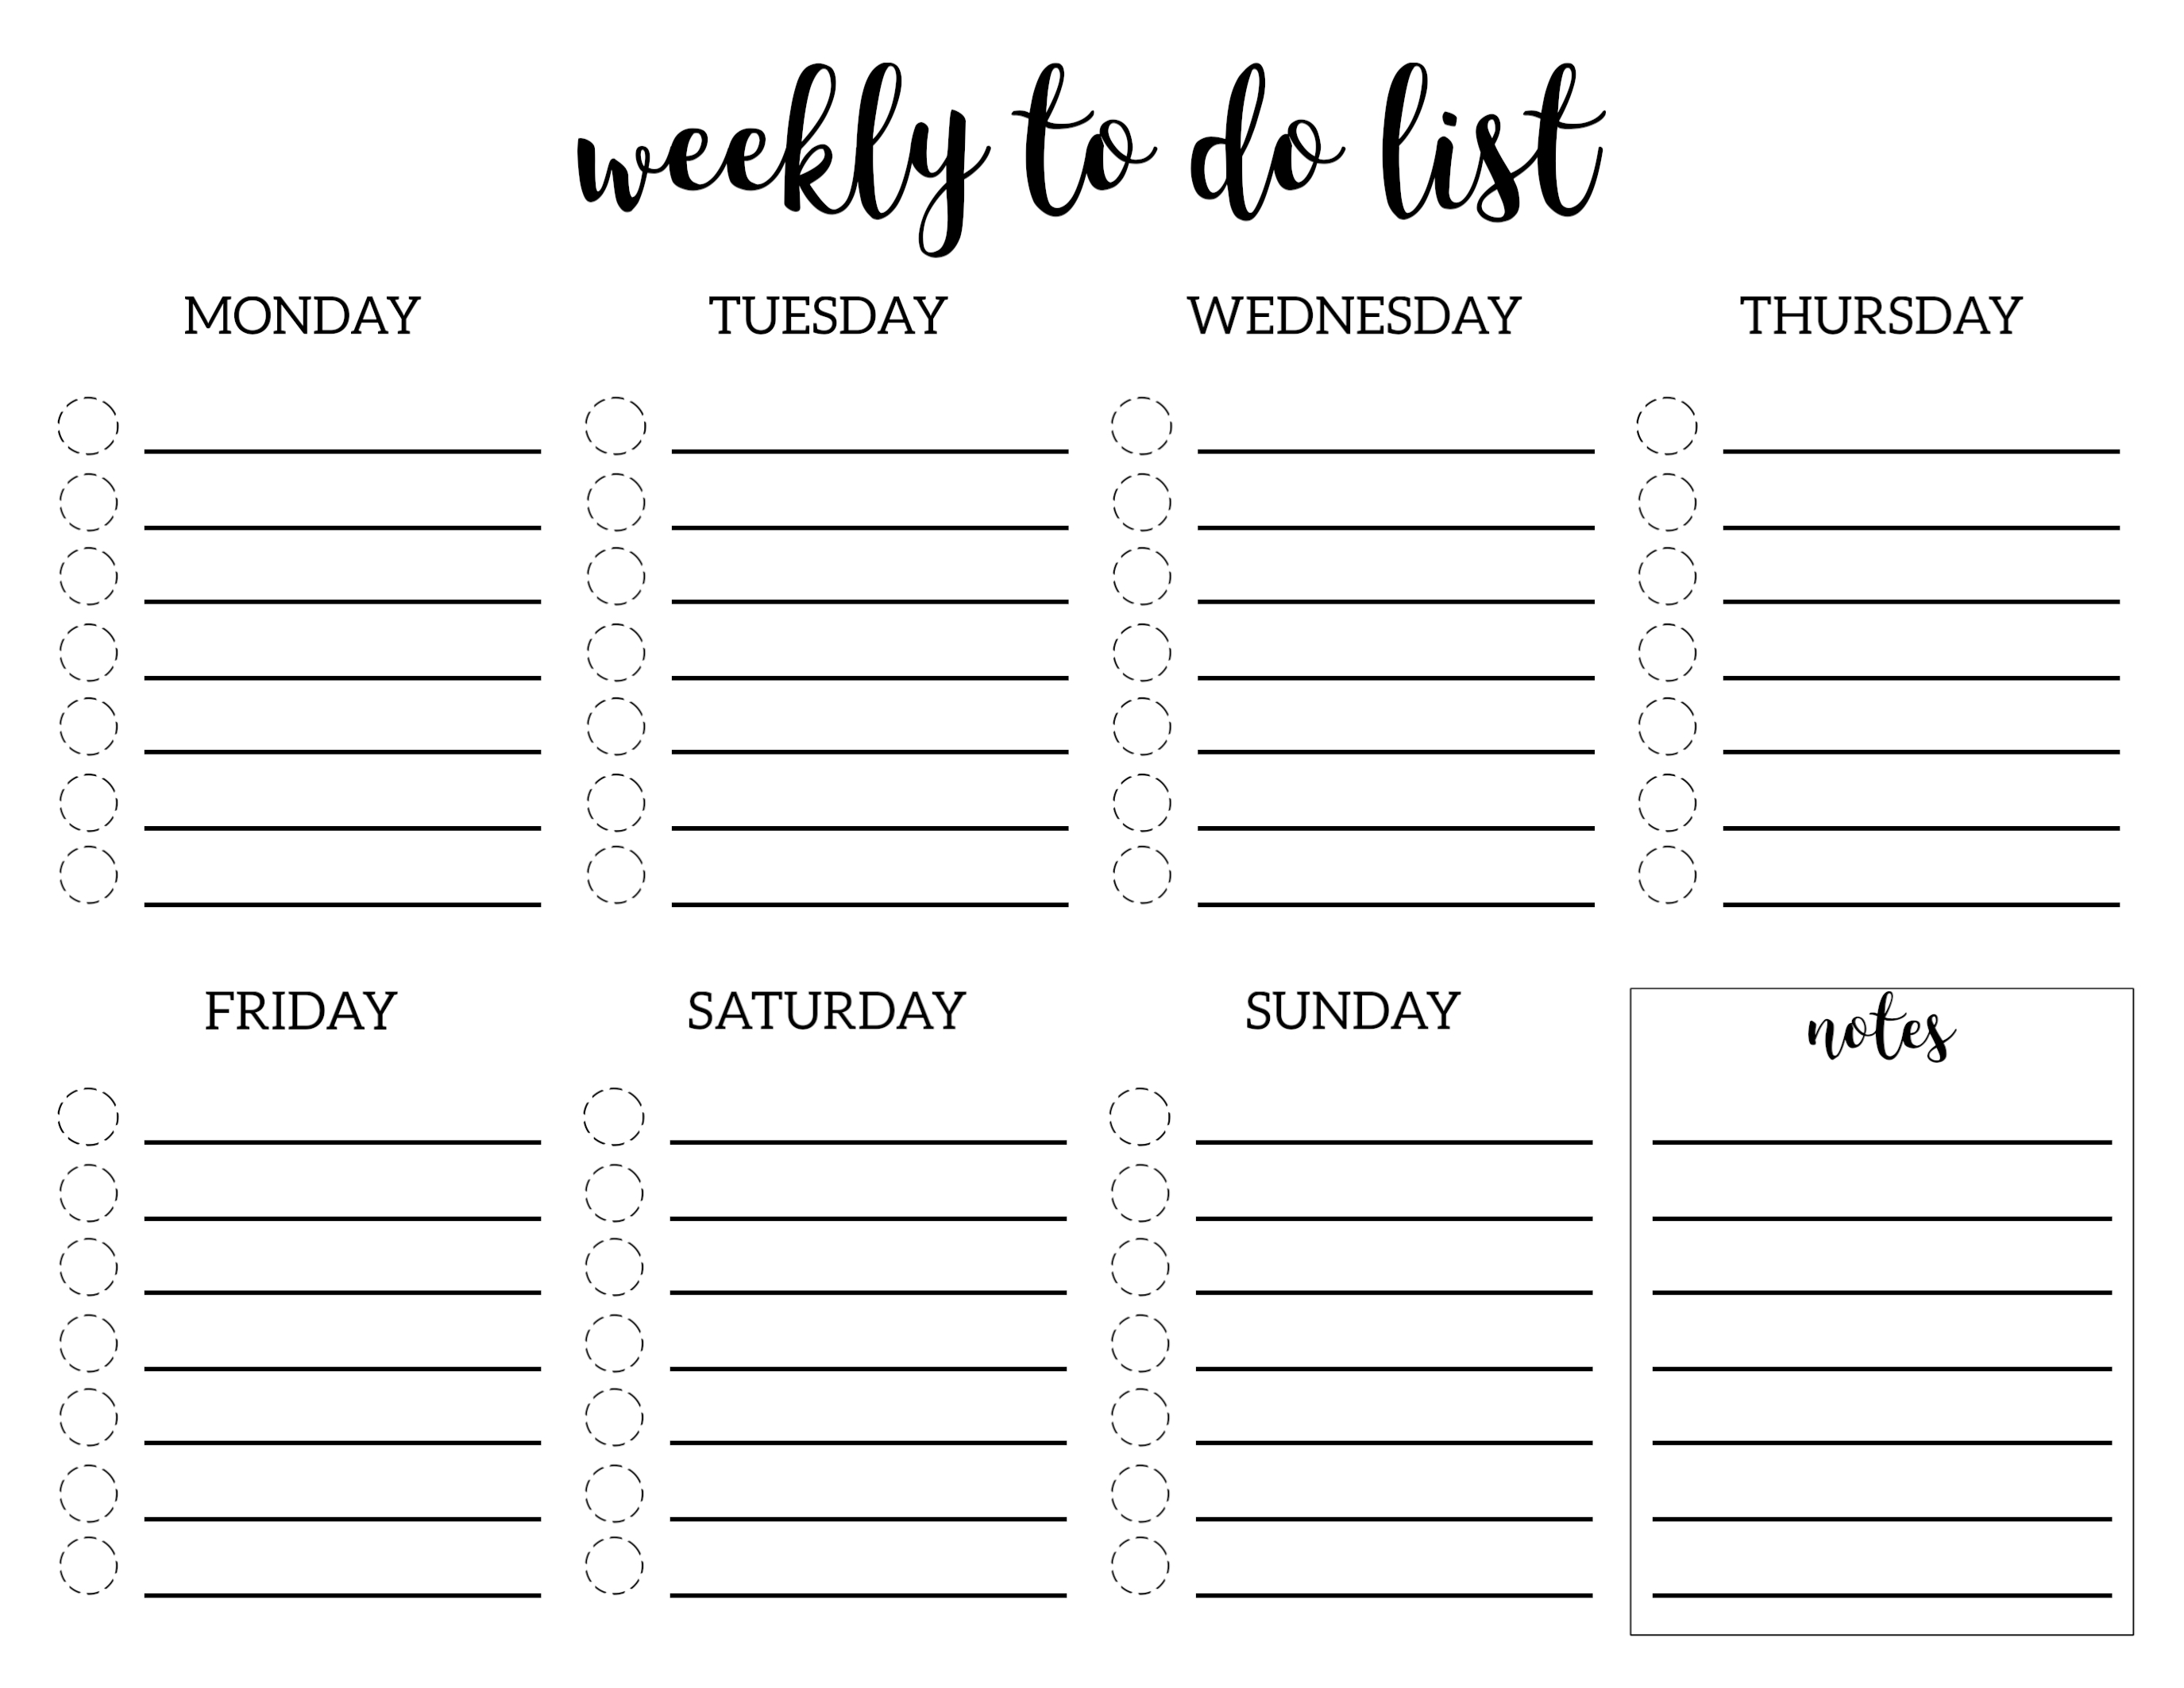 Weekly To Do List Printable Checklist Template   Paper Trail Design